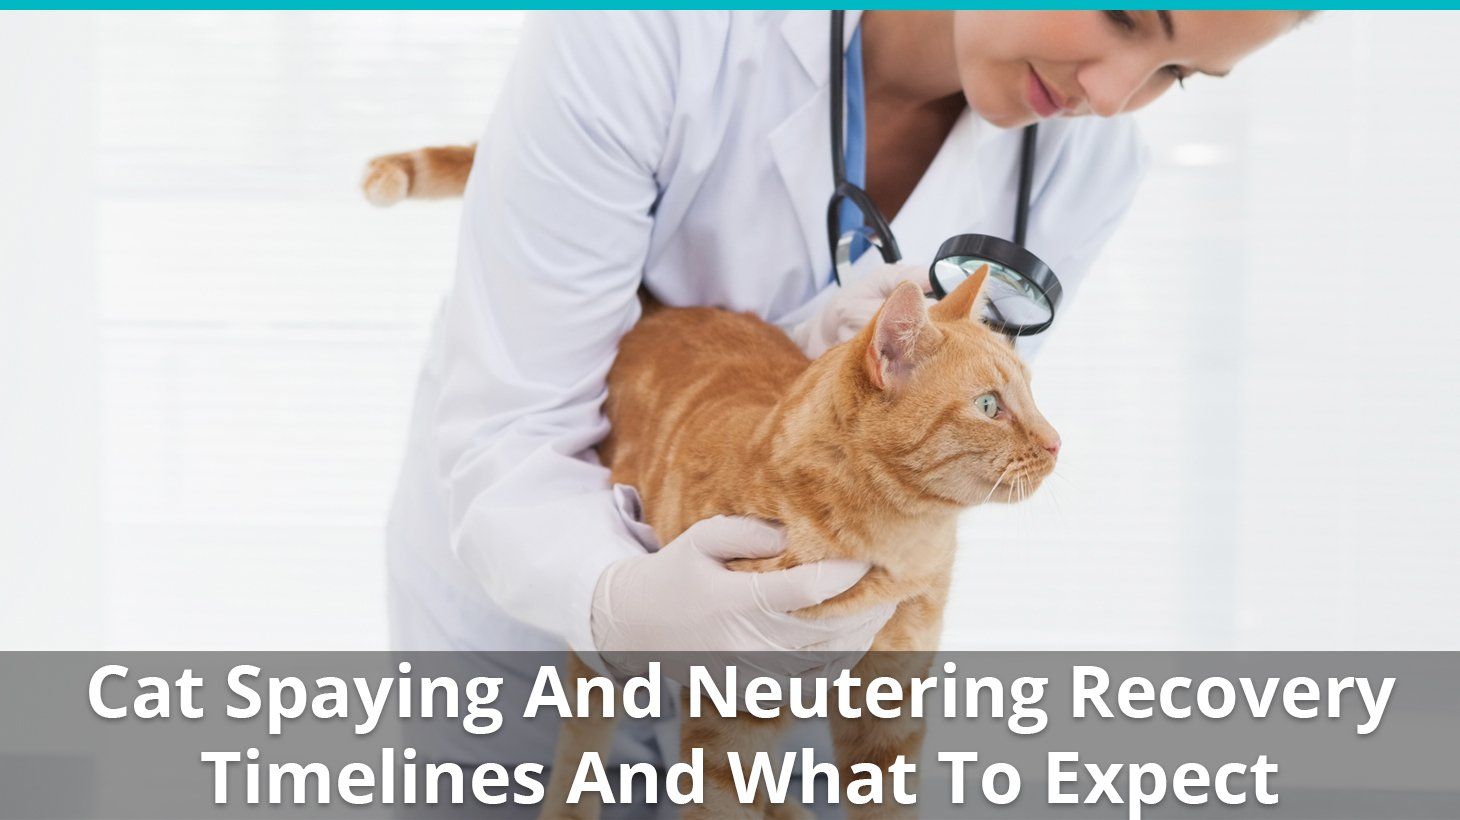 Cat Spaying And Neutering Recovery Timelines And What To ...